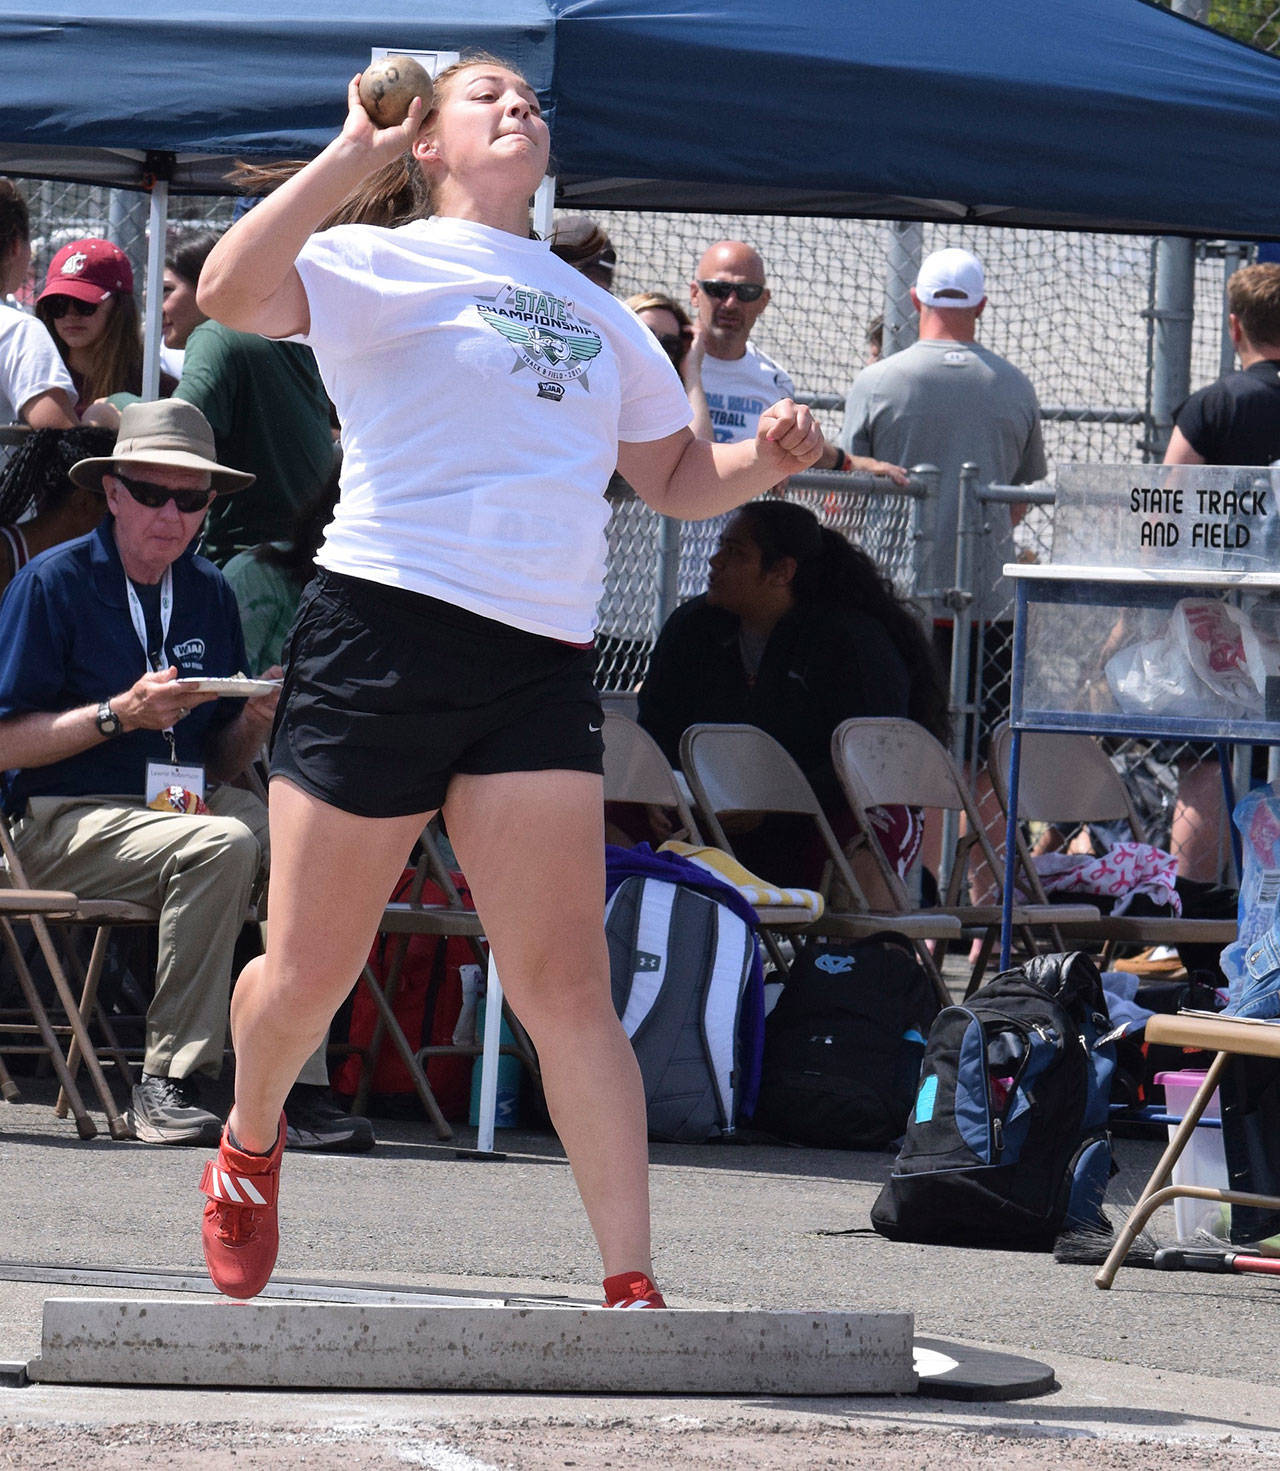 Kentlake’s Jordan Fong, bound for Stanford, took silver in the shot put with a heave of 41 feet, 6¾. RACHEL CIAMPI, Reporter